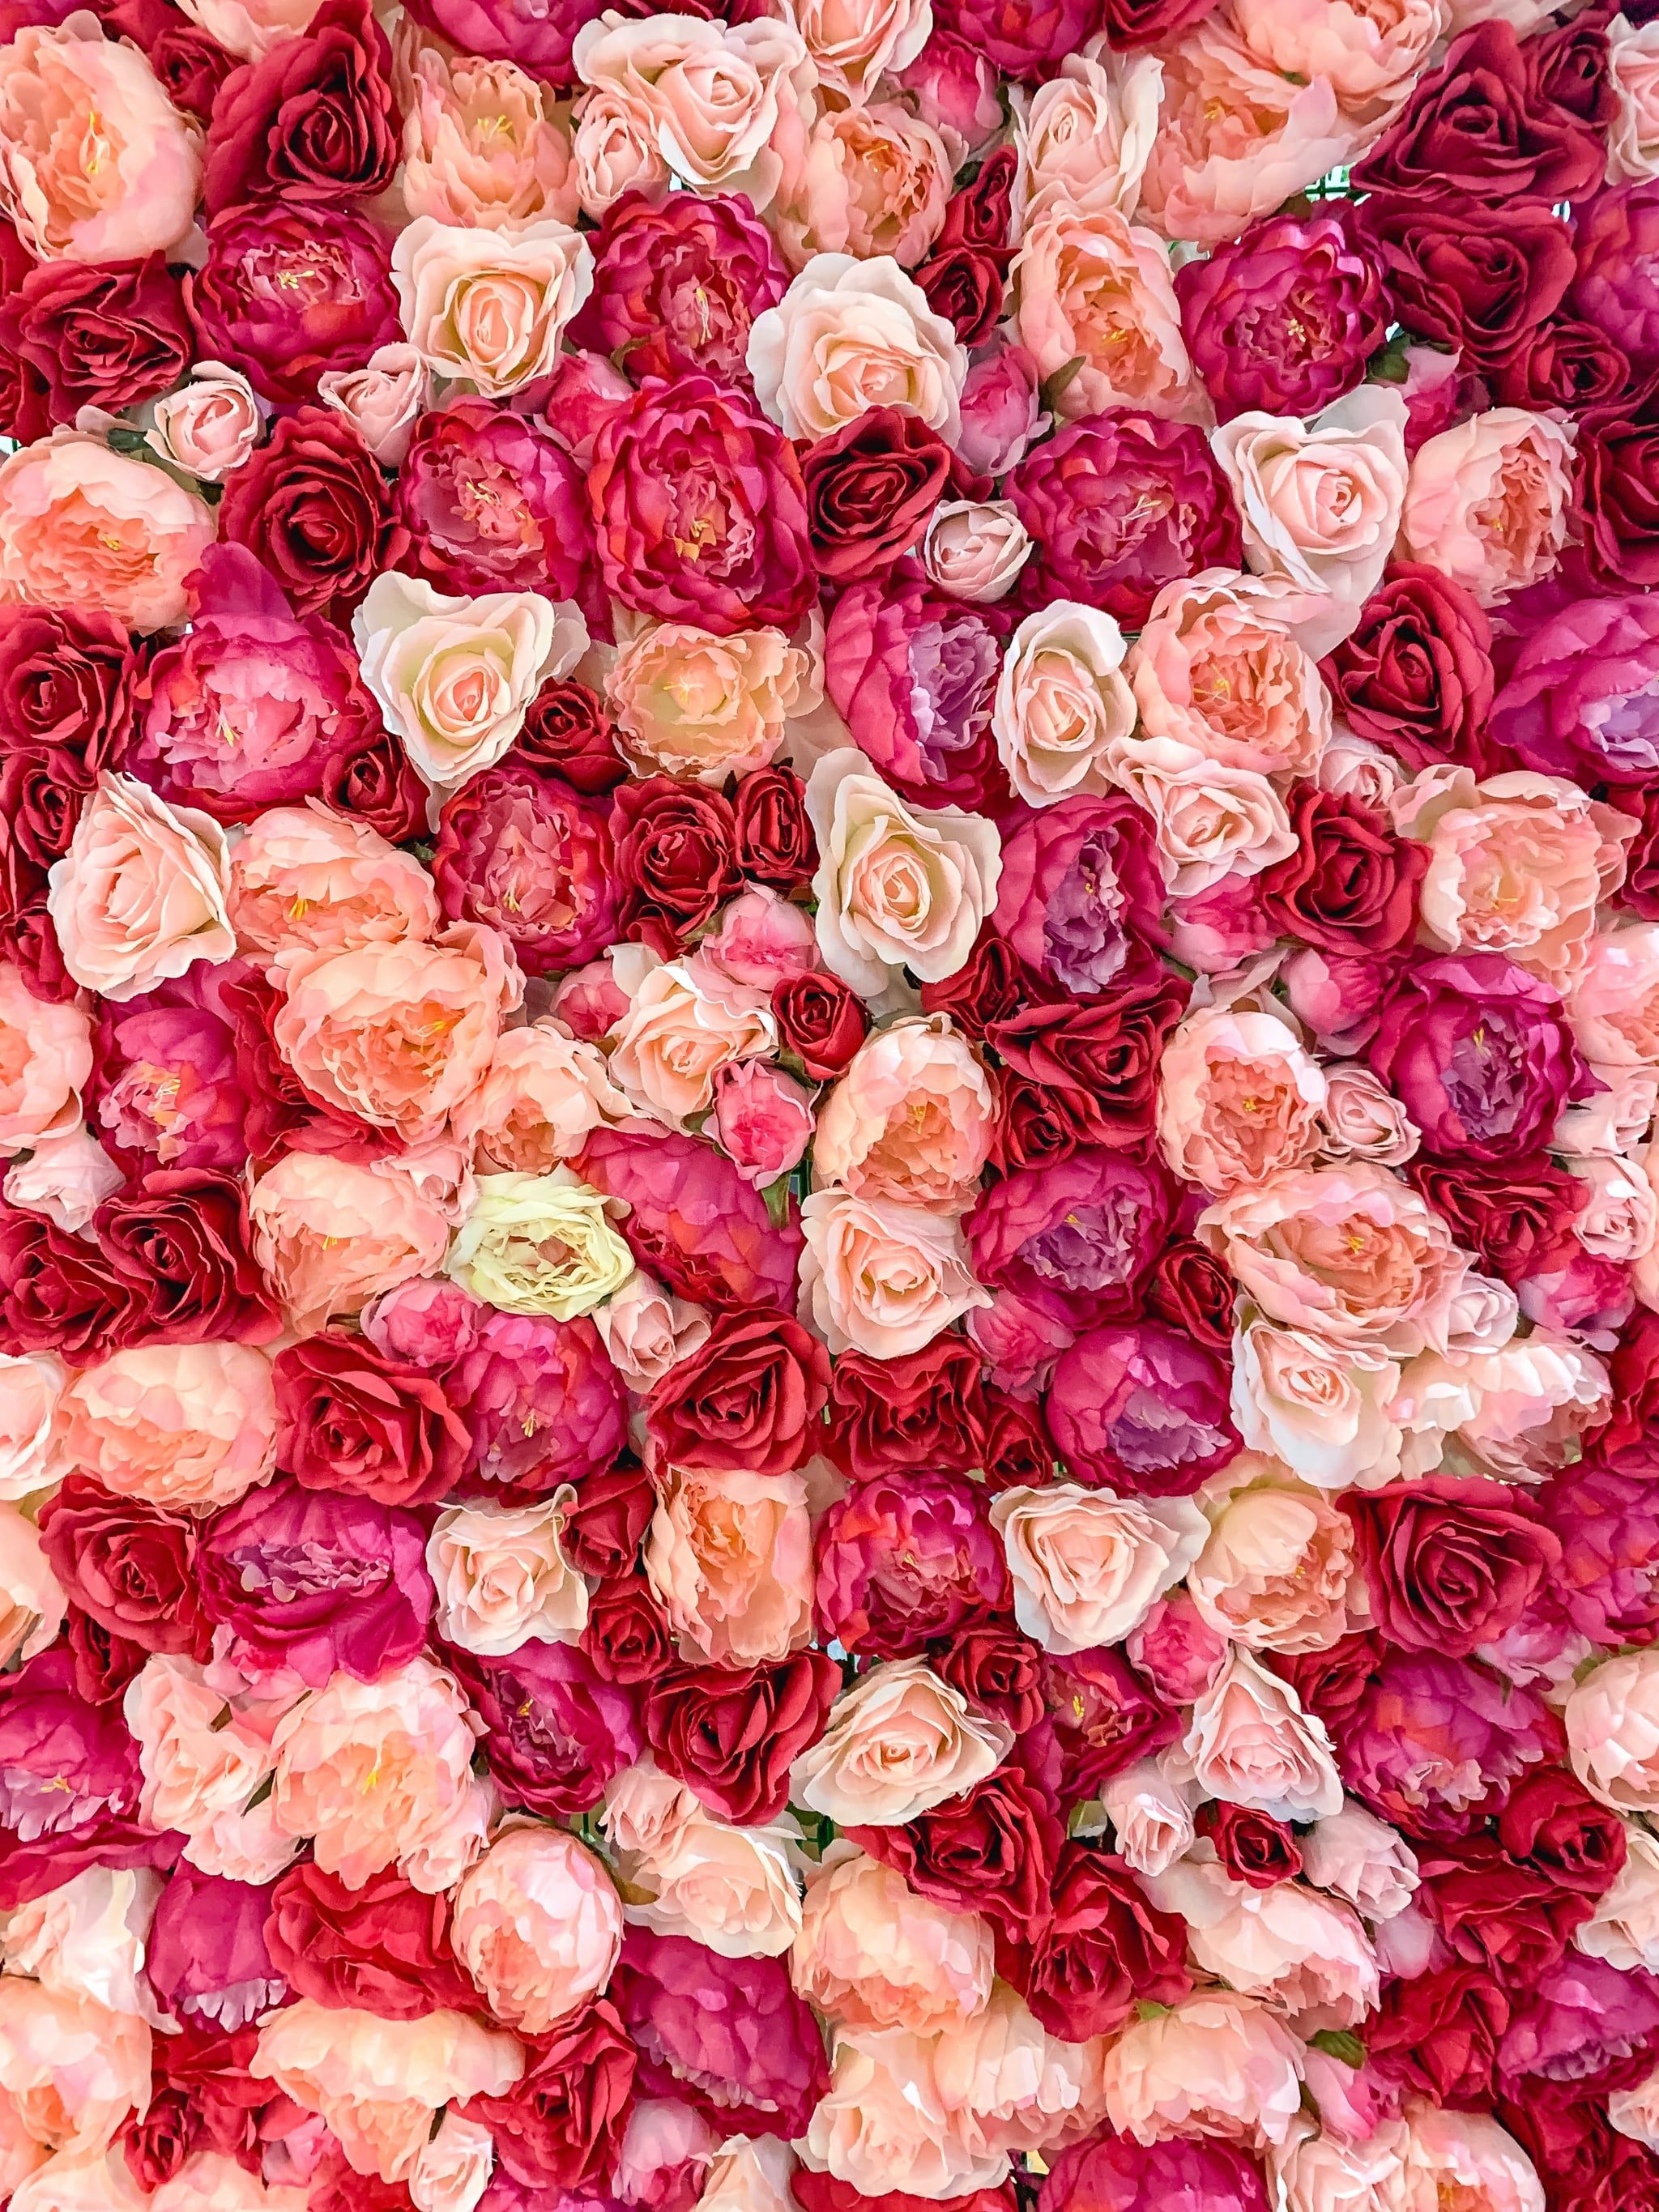 Valentine's Day Wallpaper: Assorted Roses. The Dreamiest iPhone Wallpaper For Valentine's Day That Fit Any Aesthetic